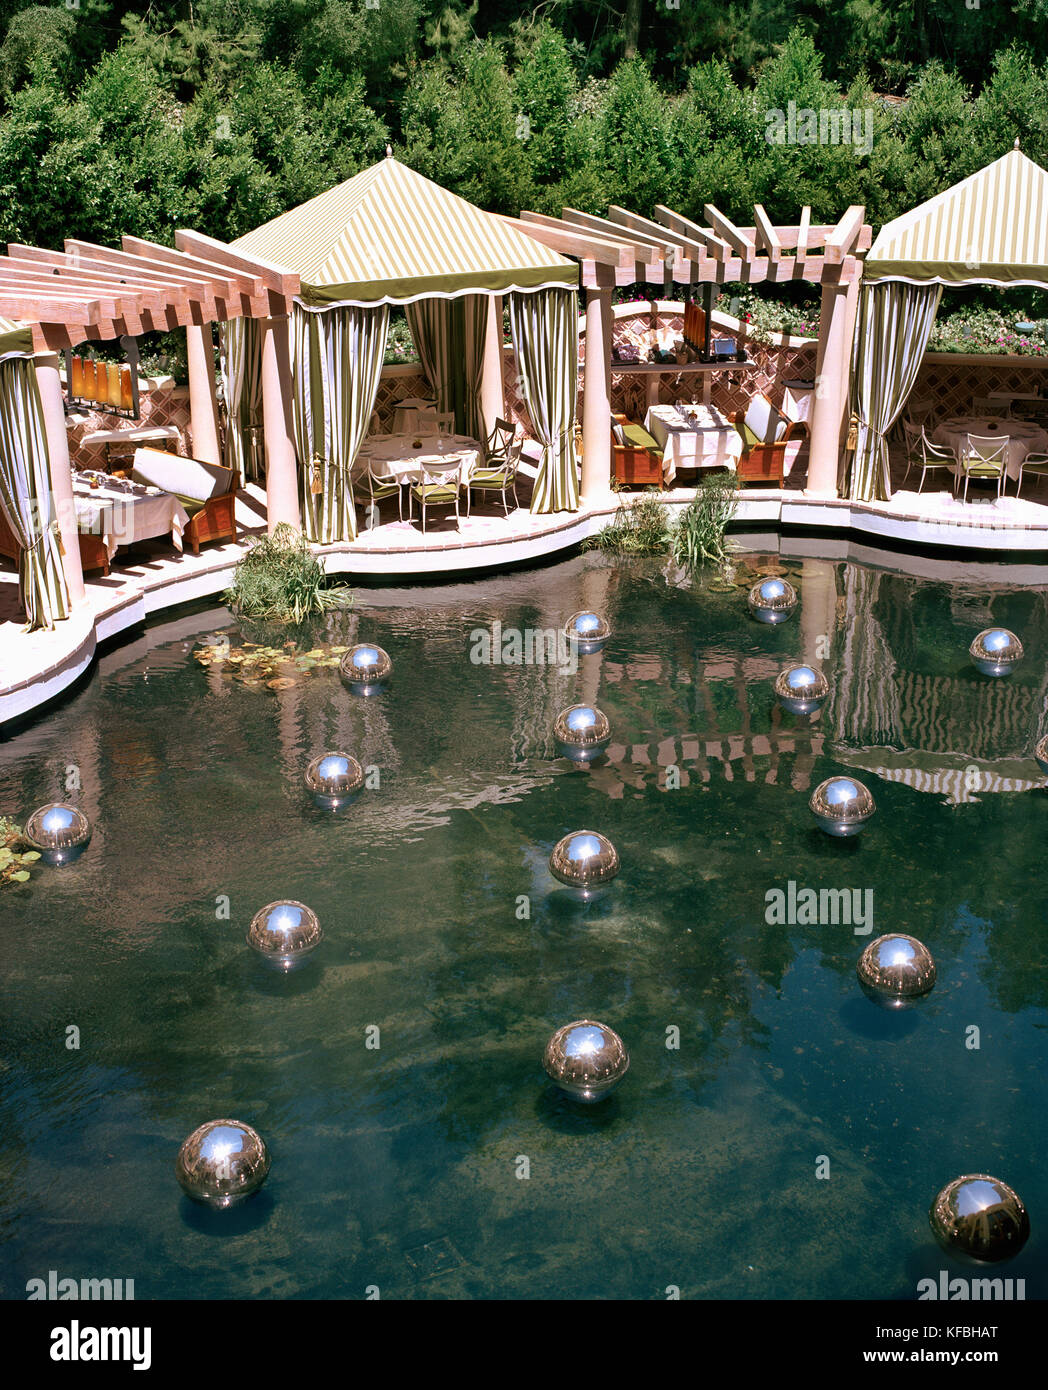 USA, Nevada, baubles floating on pool of Bartolotta Restaurant, elevated view Stock Photo